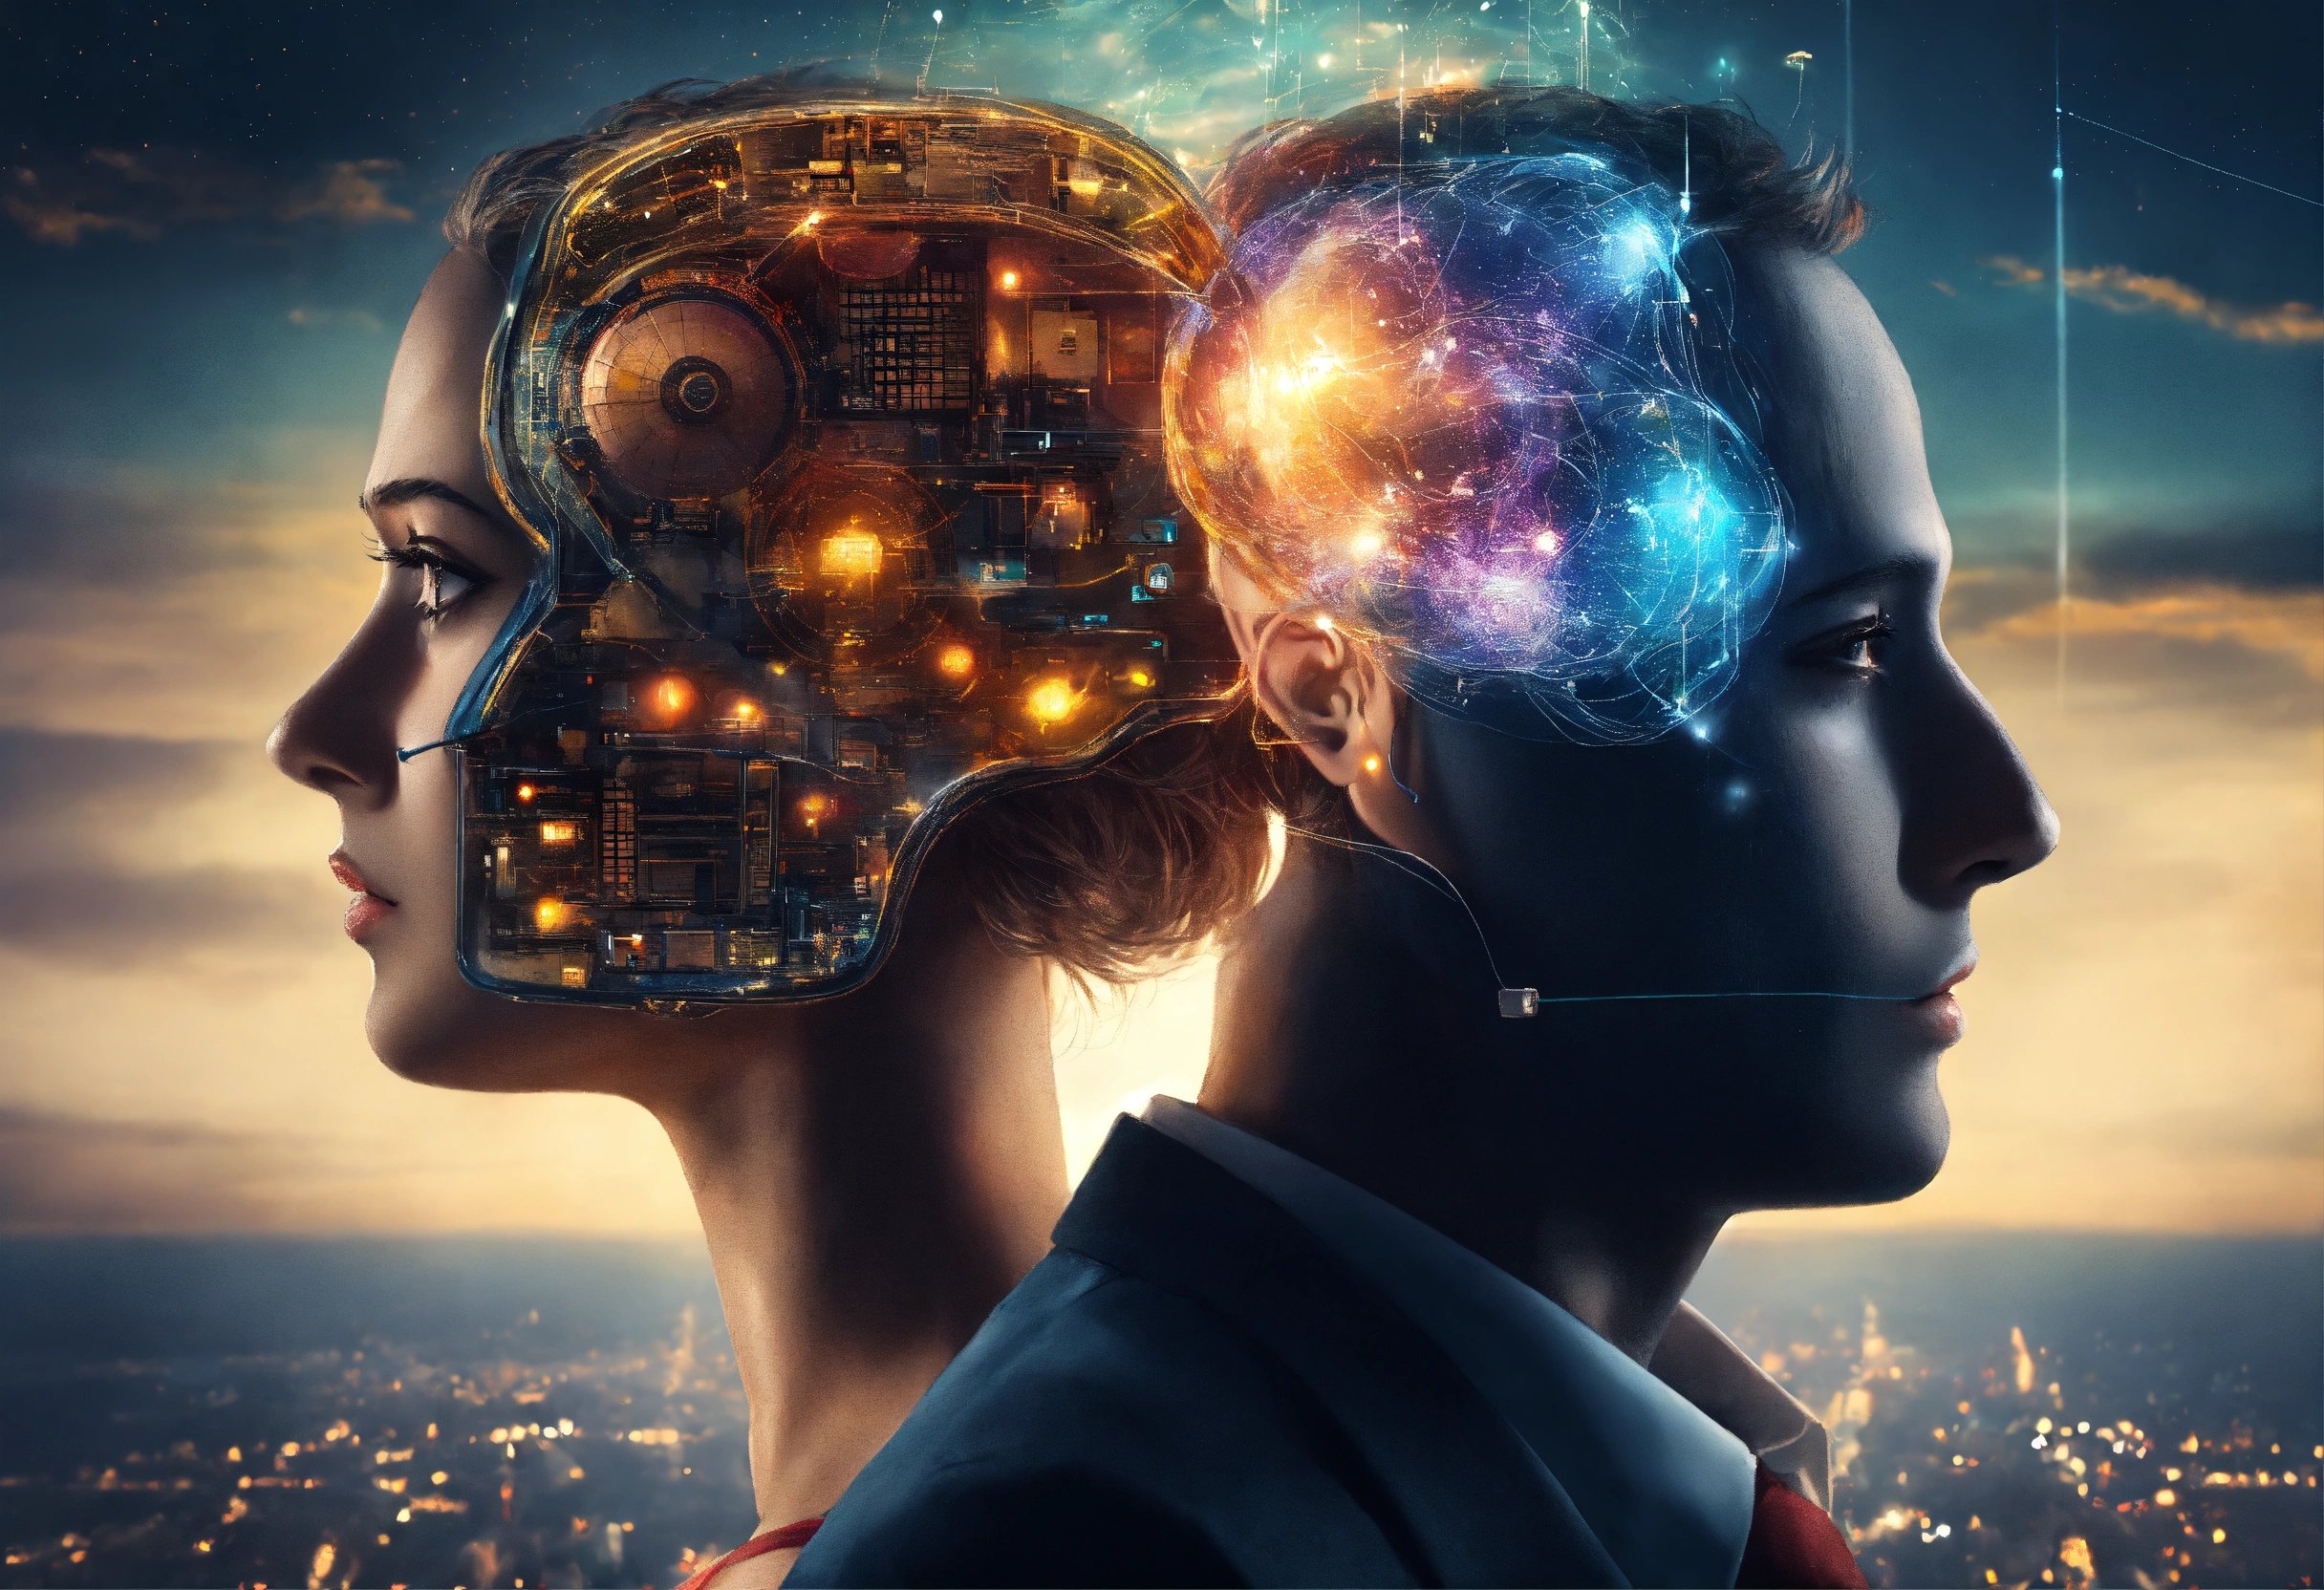 two individuals with their faces obscured by blurred rectangles, preventing identification. They are juxtaposed against a dramatic and visually complex background. The person on the left has an intricate mechanical structure visible within their head, suggesting a blend of human and machine elements. The individual on the right has a universe or galaxy within their head, indicating a cosmic or metaphysical connection.

Two people are in the foreground with their faces obscured for privacy. The person on the left has part of their head visually represented as mechanical and electronic components, indicating a cyborg or artificial intelligence theme. The individual on the right has a visual representation of a galaxy or universe within their head, symbolizing depth of thought, consciousness, or connection to the cosmos. Both individuals are wearing formal attire; one is in red and another in dark color which could be black or navy blue. The background is illuminated cityscape during nighttime with lights glowing, adding to the dramatic effect of the image.